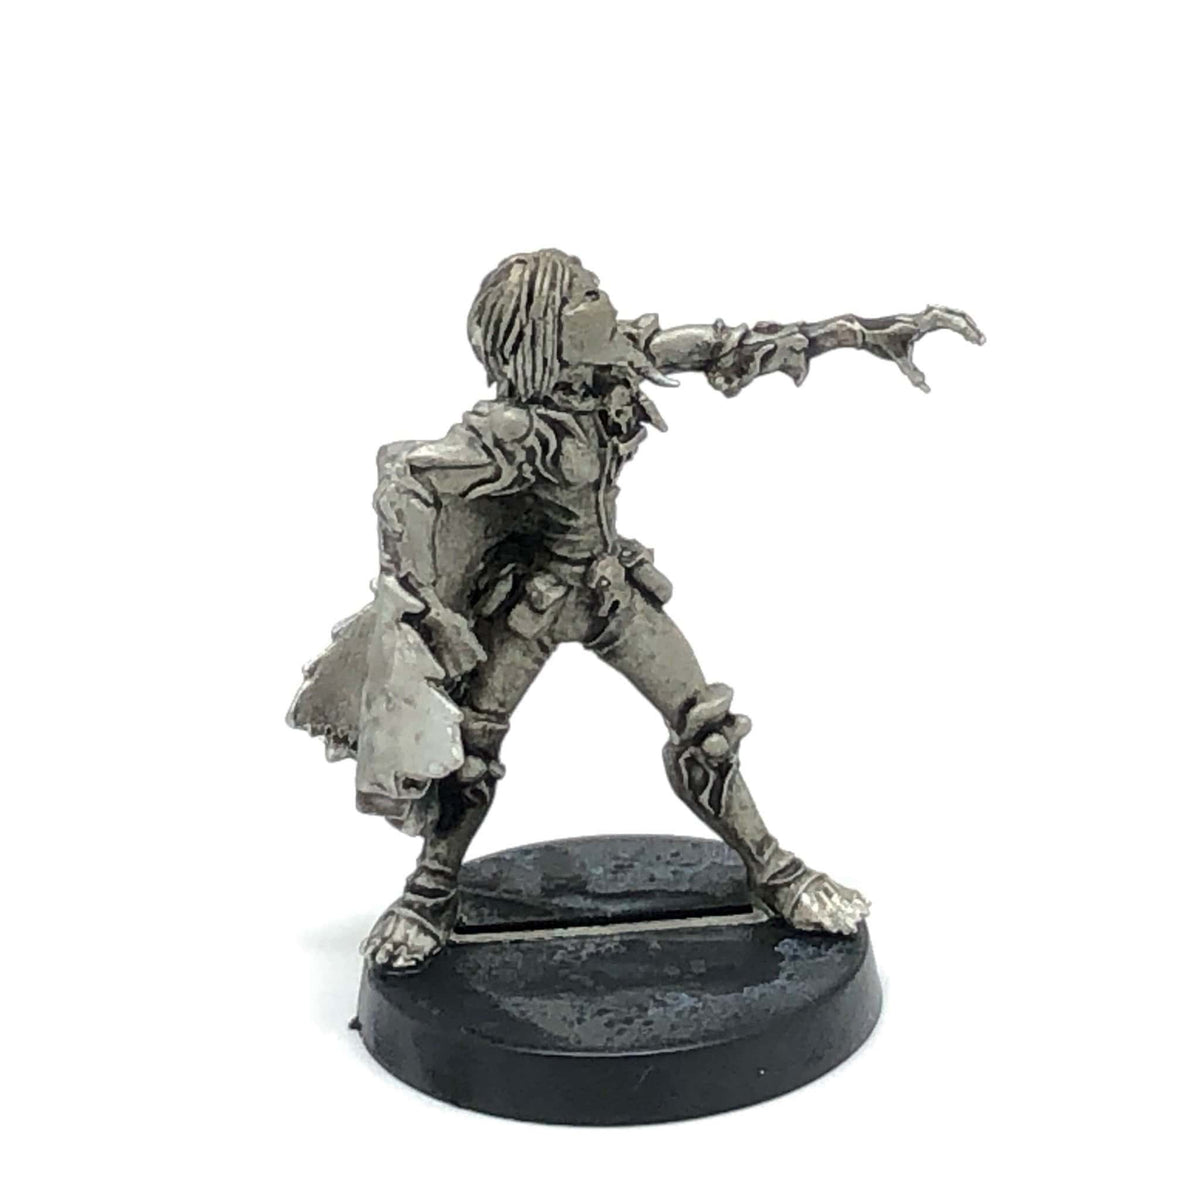 Sisters of Death Witch Elves Wights Miniature Bedlem Bear Miniatures Exit 23 Games Sisters of Death Witch Elves Wights